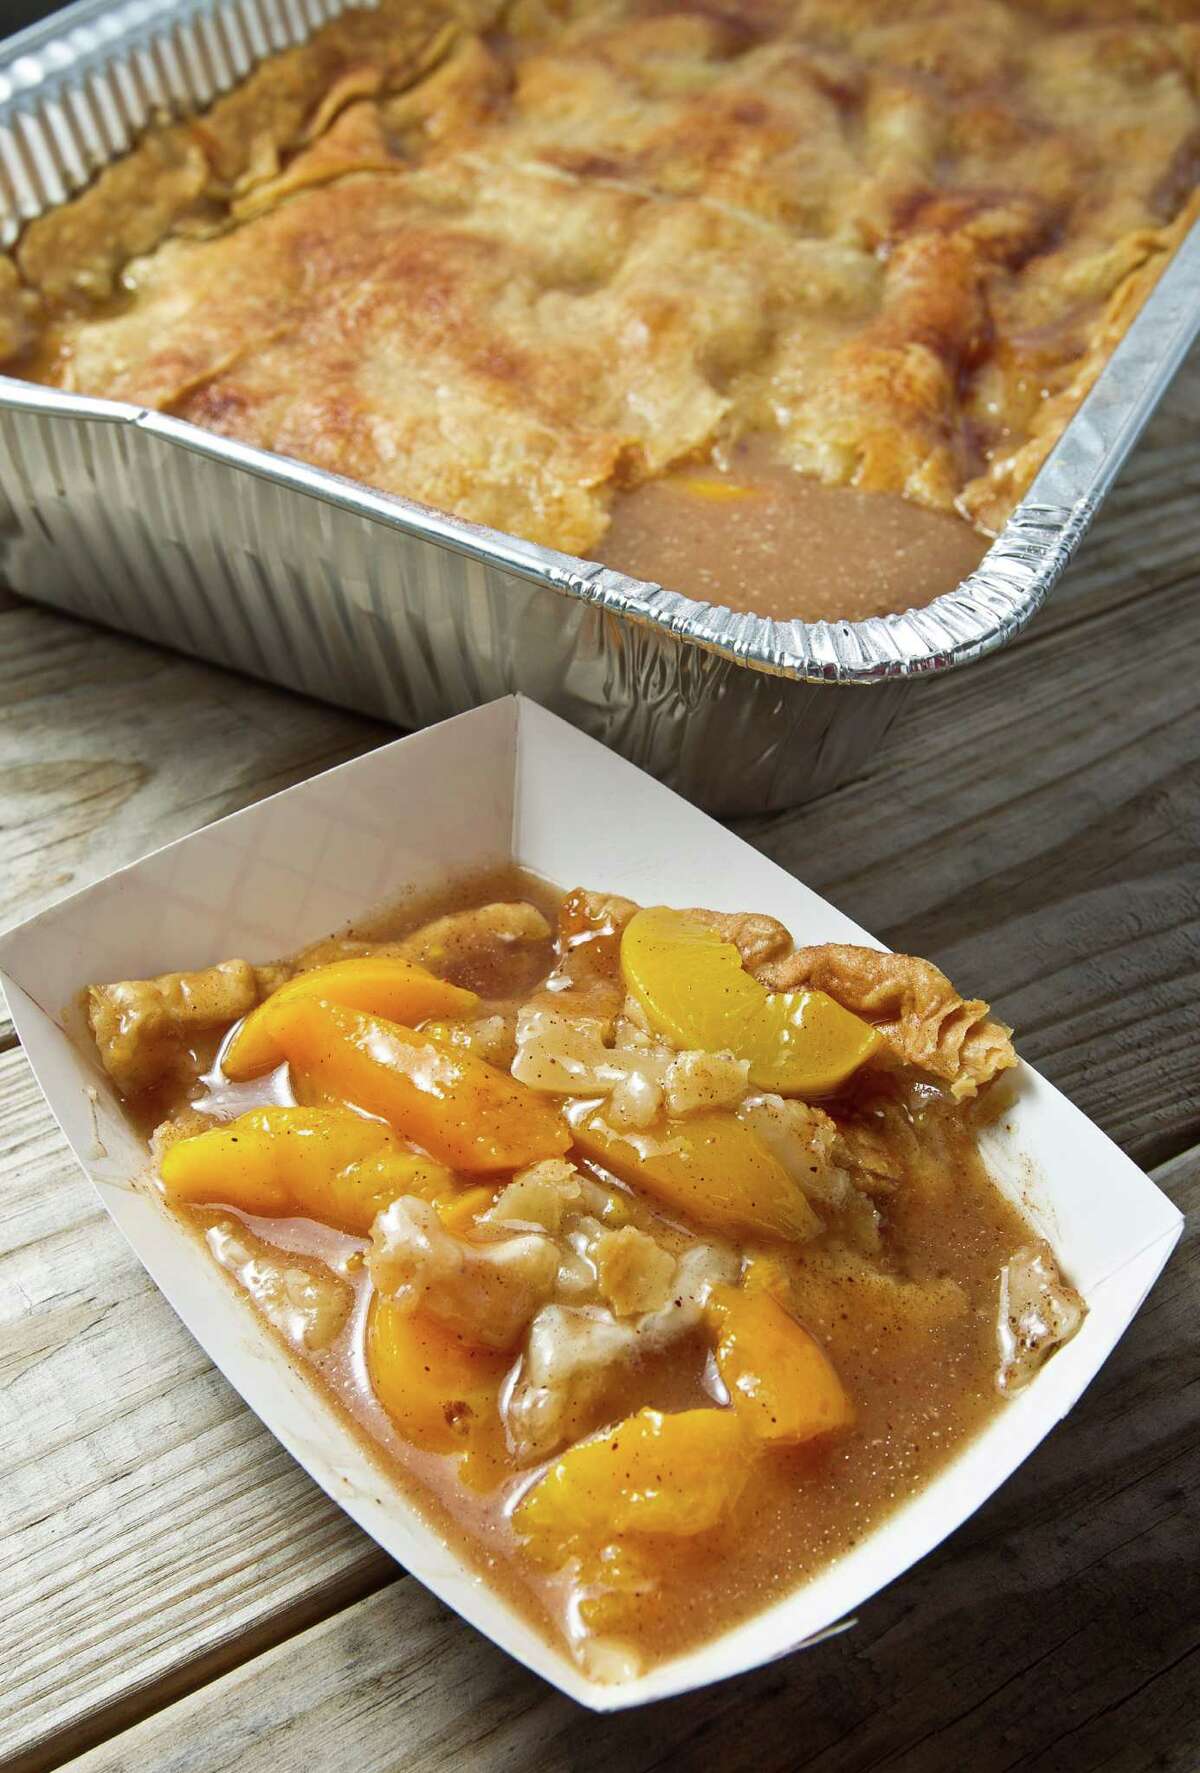 The peach cobbler is much like you would find at other barbecue eateries.